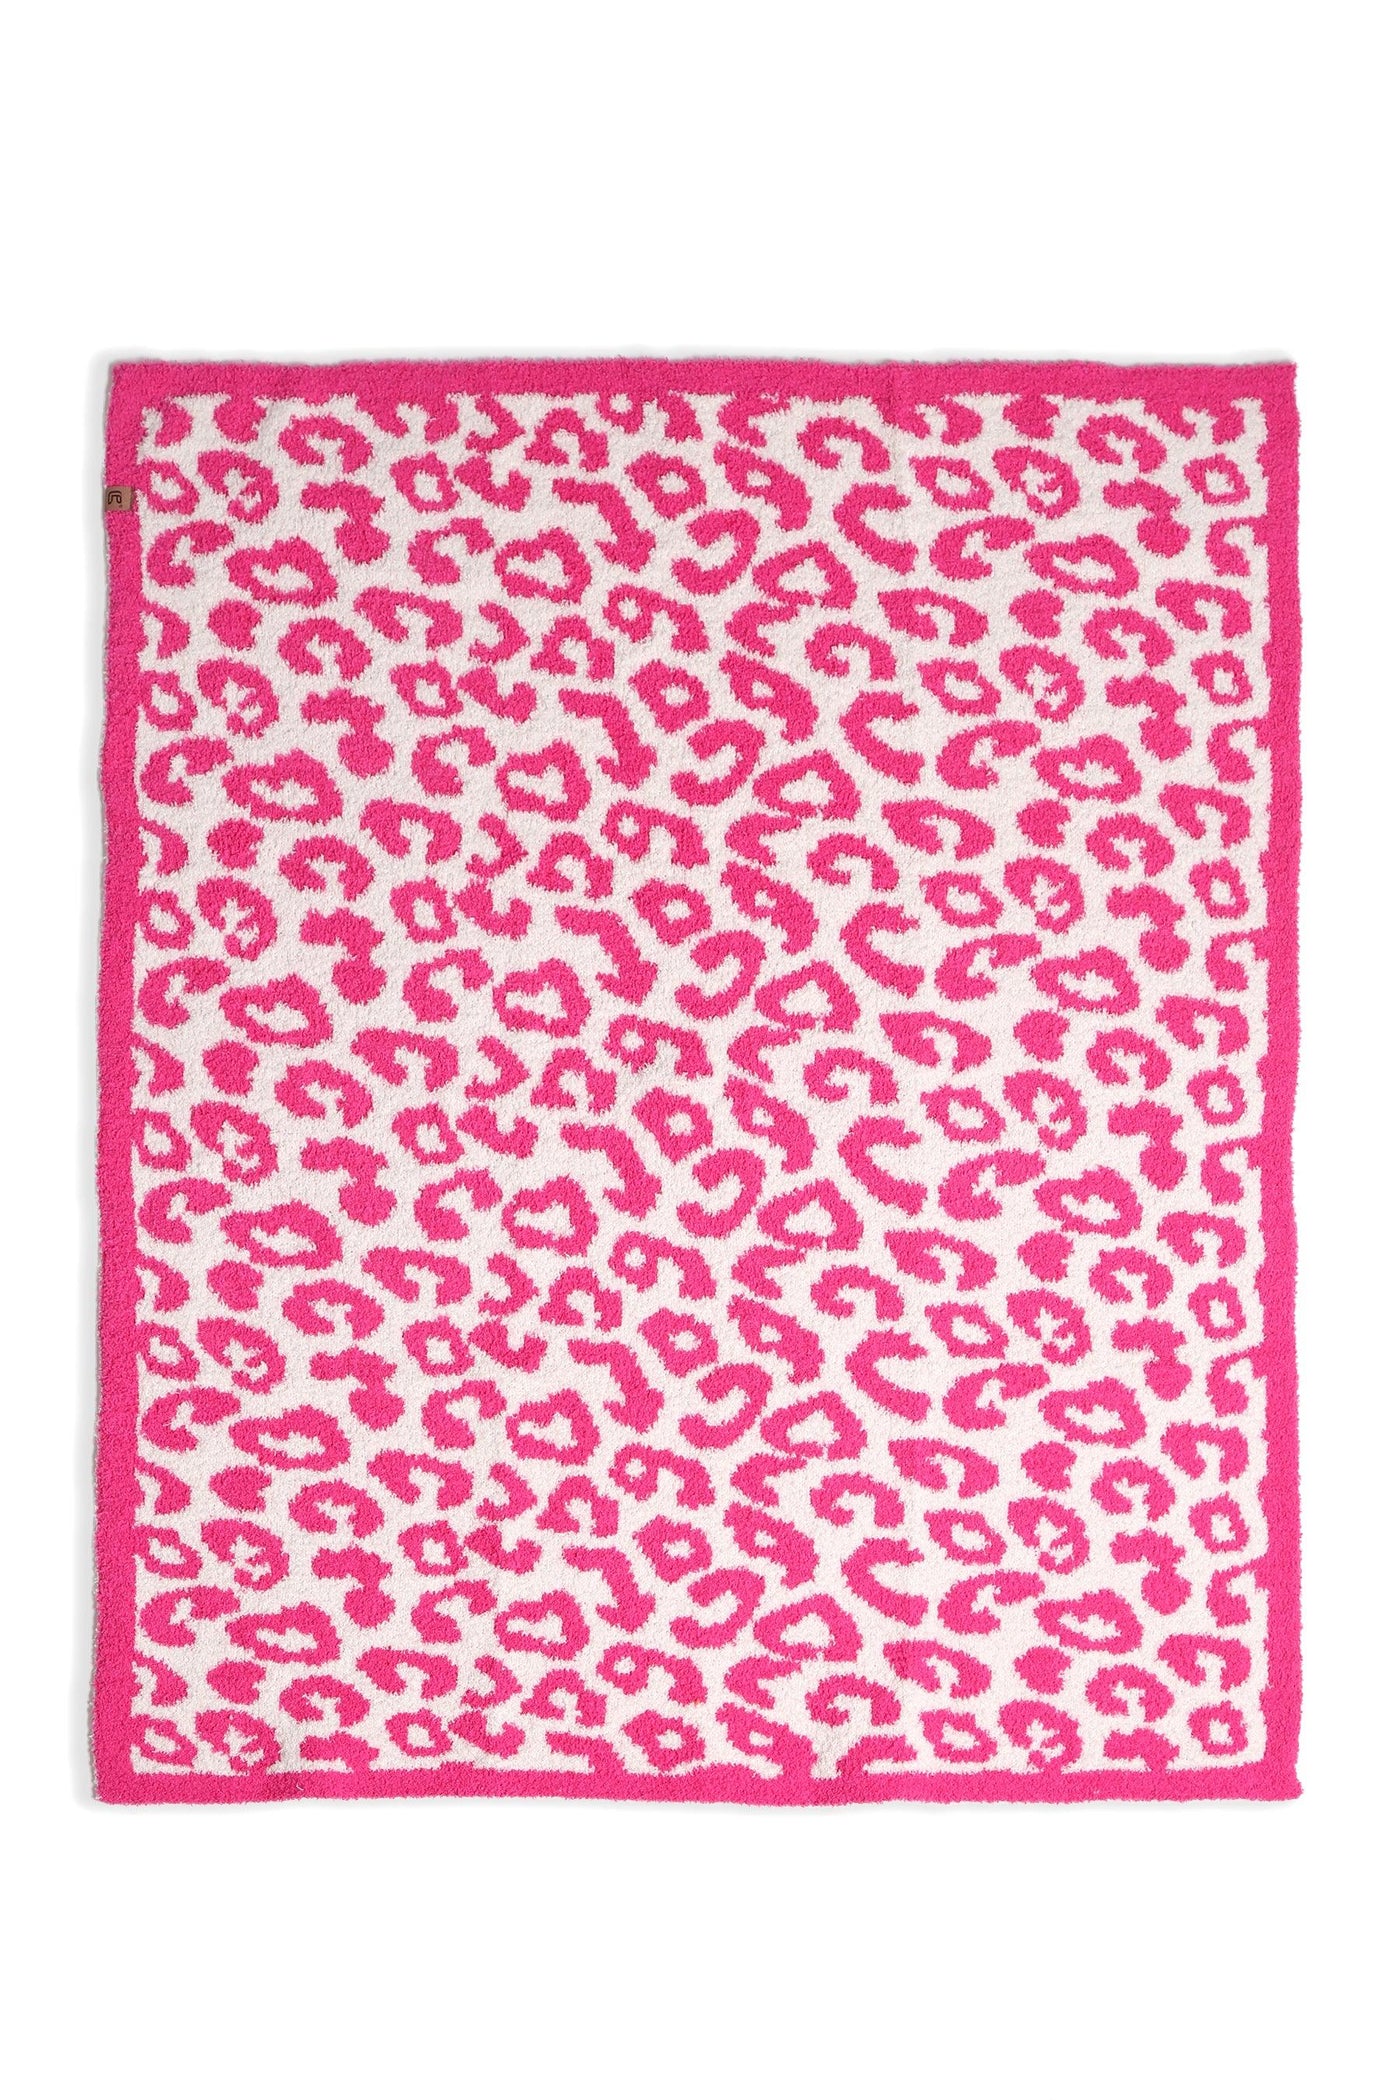 MINI WINTER DREAMS BLANKET , Blankets , it’sNOMB. The Label , baby barefoot dreams blanket, baby gifts, baby pink, baby shower gift, barefoot, barefoot dreams, blanket, blankets, dreams, fuchsia barefoot dreams blanket, kids barefoot dreams blanket, kids blanket, leopard, leopard print, pink, throw blanket, throw blankets , It's NOMB , itsnomb.com